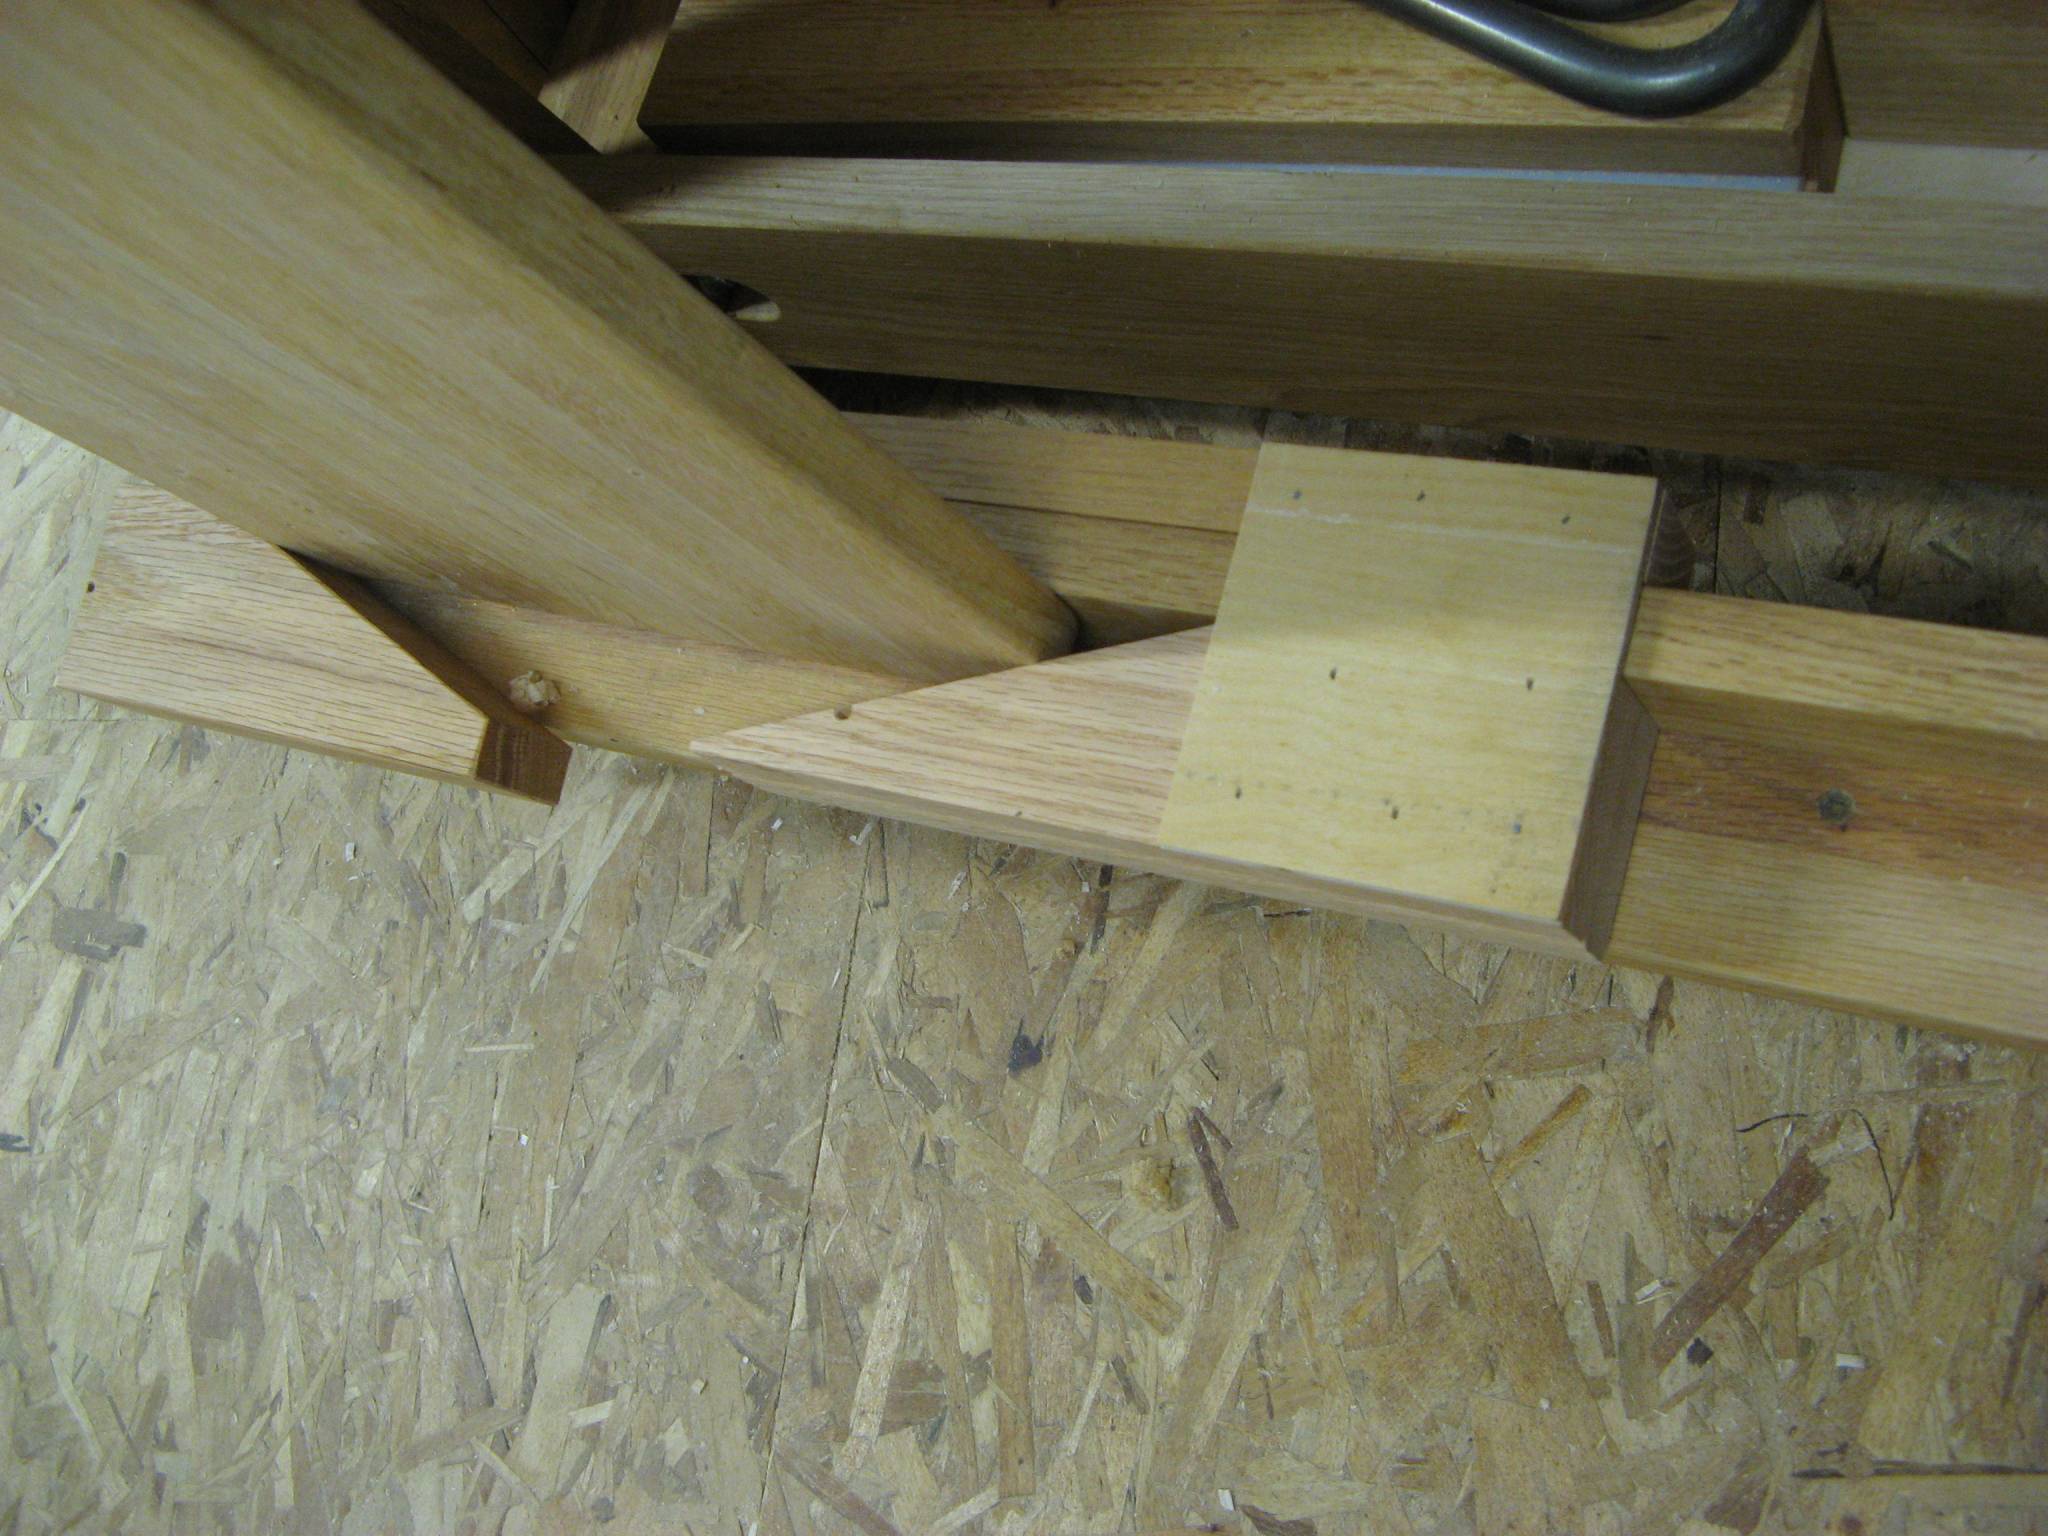 workbench build - planing beam, lower end clamp